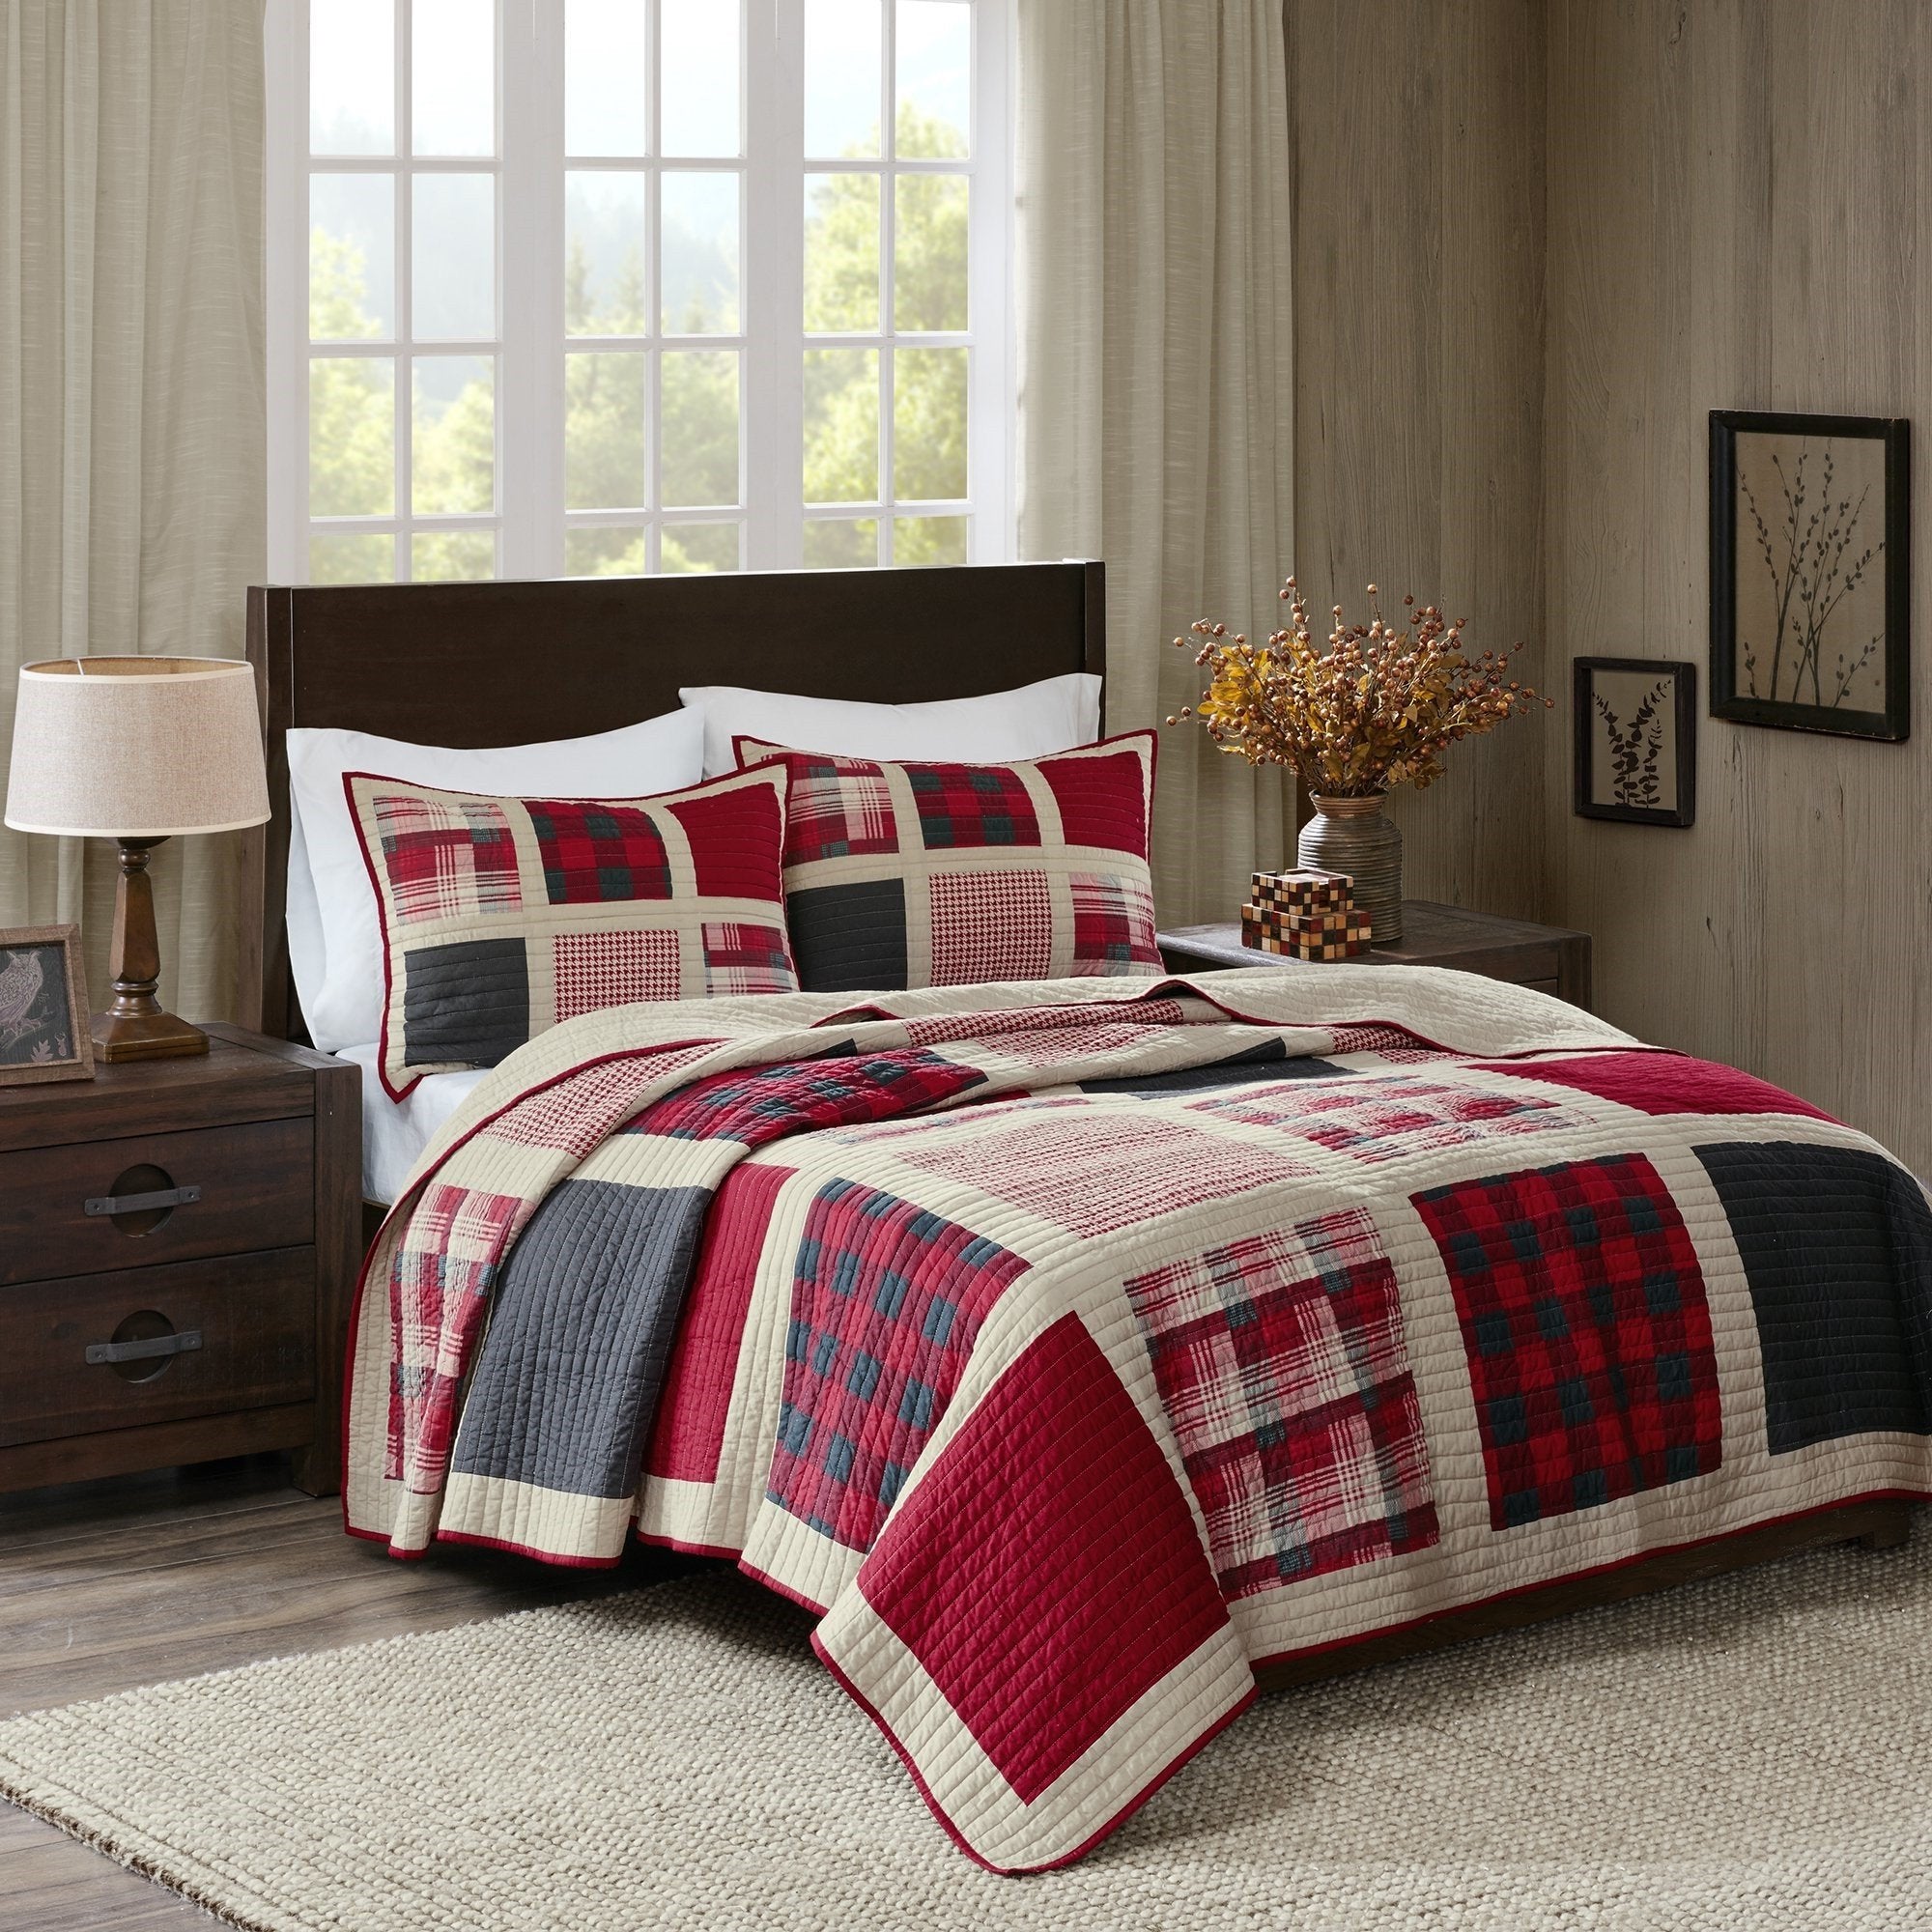 oversized king comforters sets with bed skirt